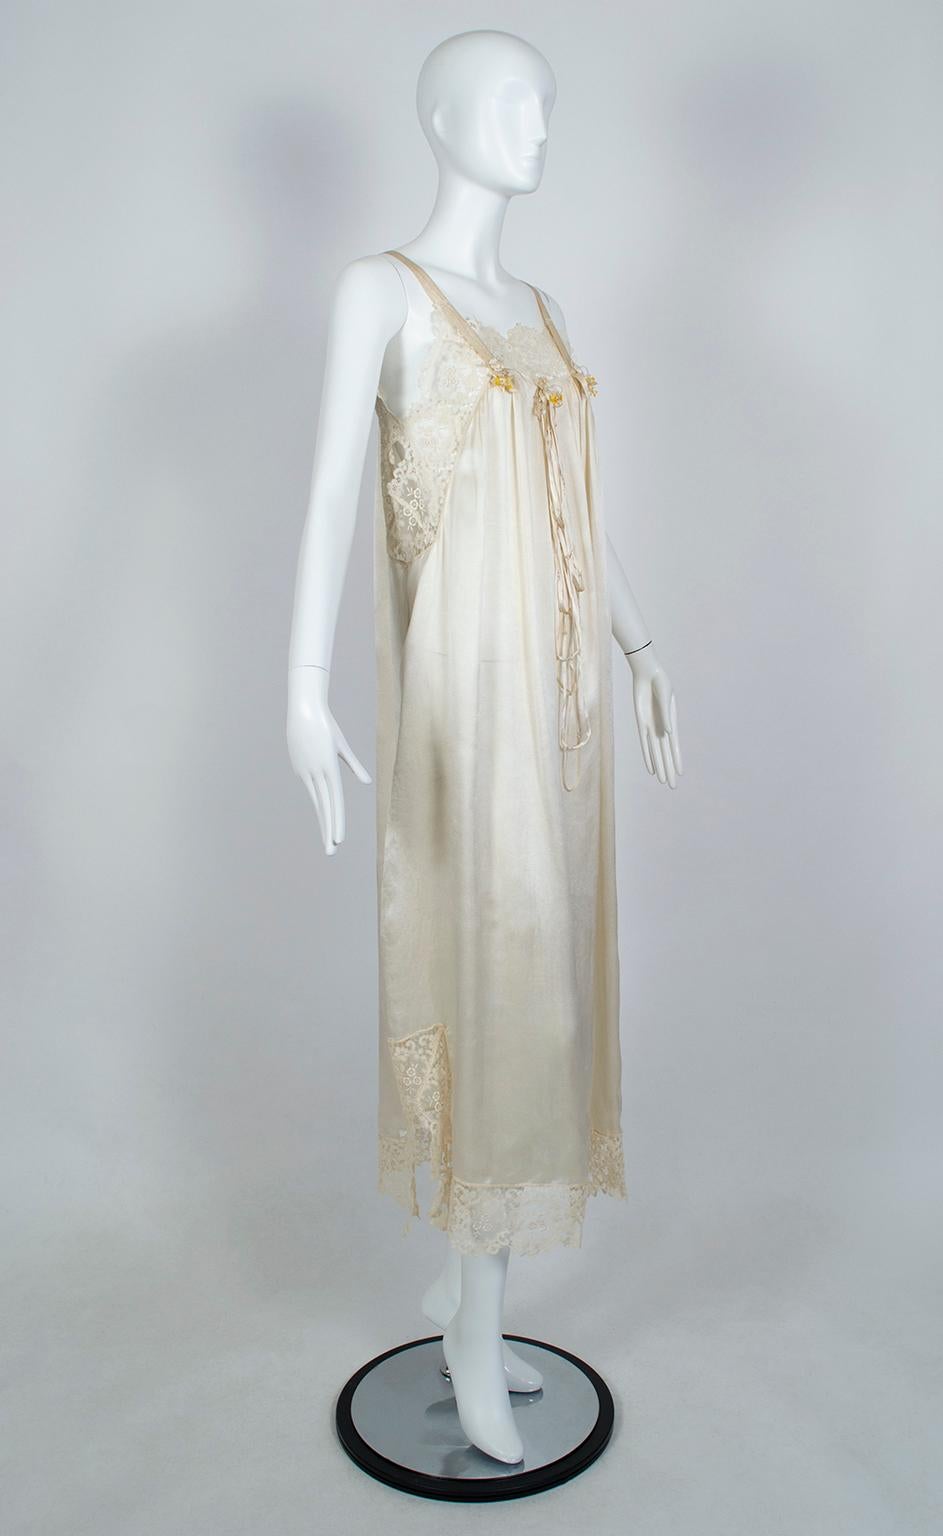 Part of a spectacular wedding trousseau, this gown is covered in 3 ½” swaths of French lace around the neckline and hem, and down each side from the shoulders to the waist. Elegant and feminine, it also features unusual cutouts at the underarms and